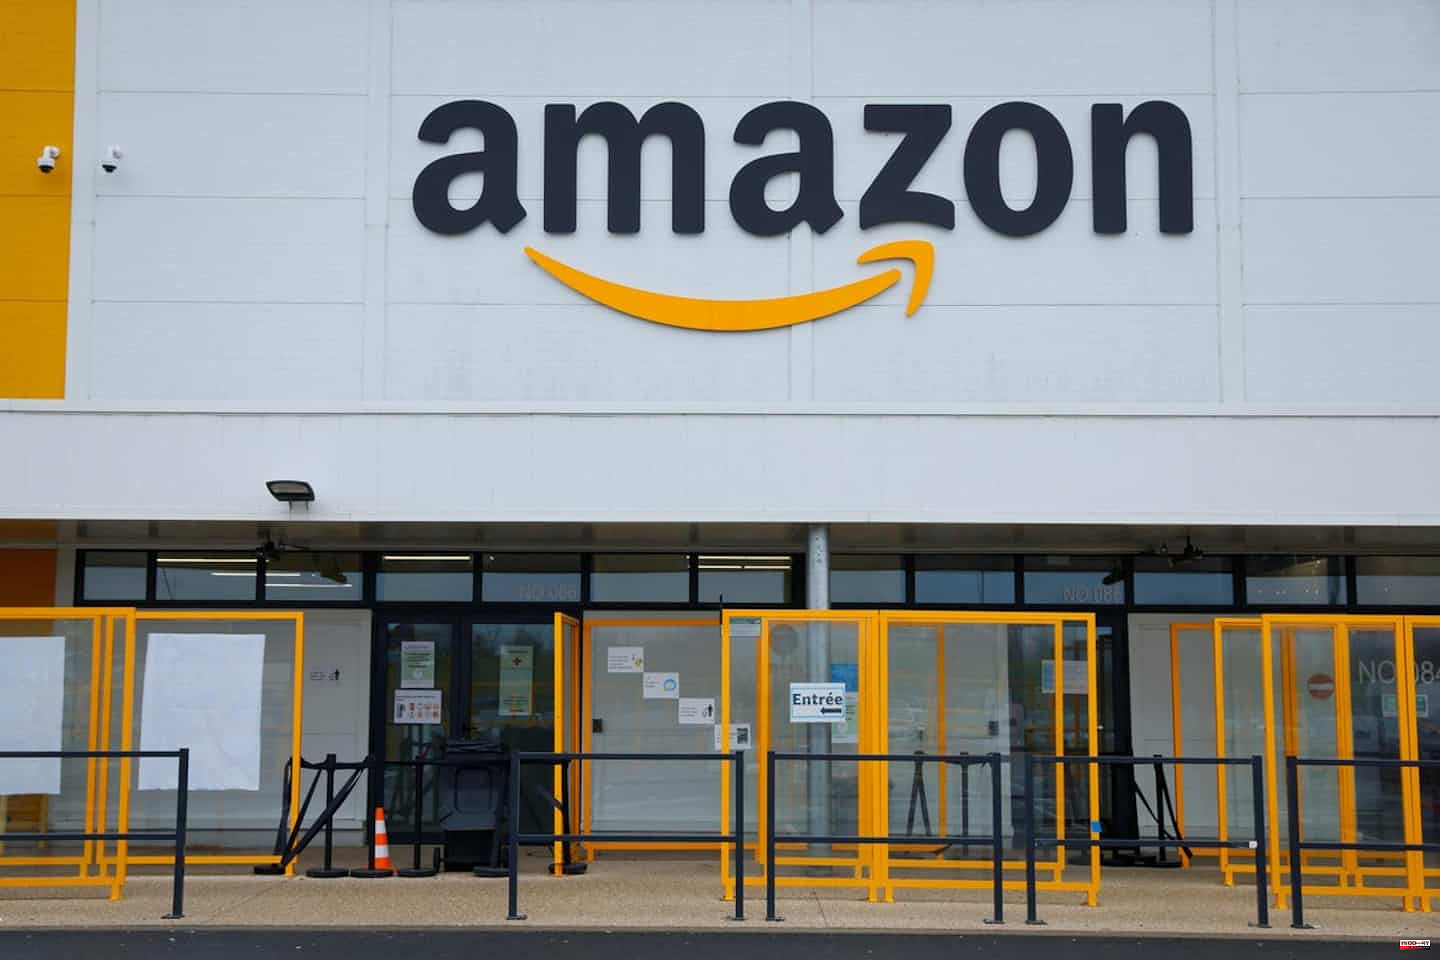 Amazon sued for discrimination by New York State